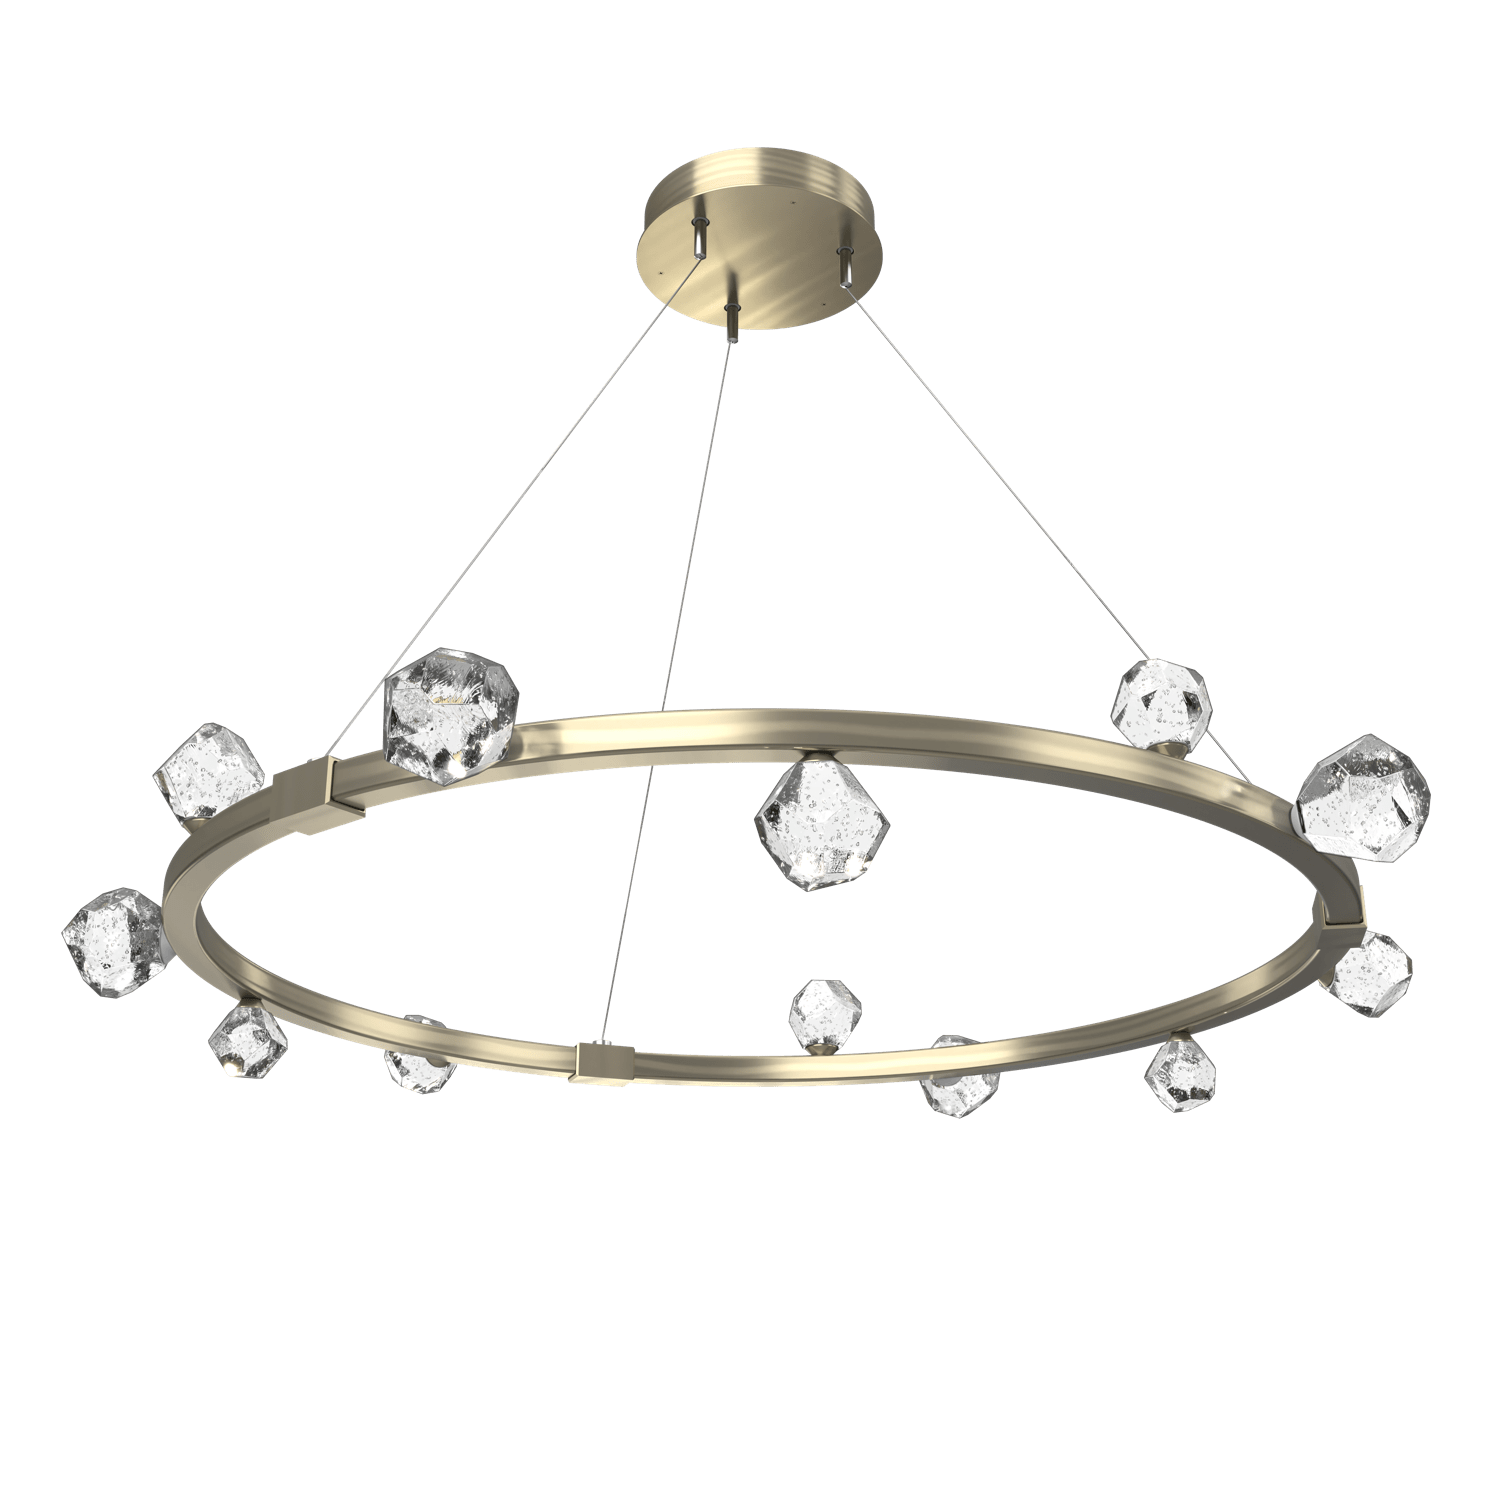 CHB0070-40-HB-Hammerton-Studio-Stella-40-inch-radial-ring-chandelier-with-heritage-brass-finish-and-clear-cast-glass-shades-and-LED-lamping